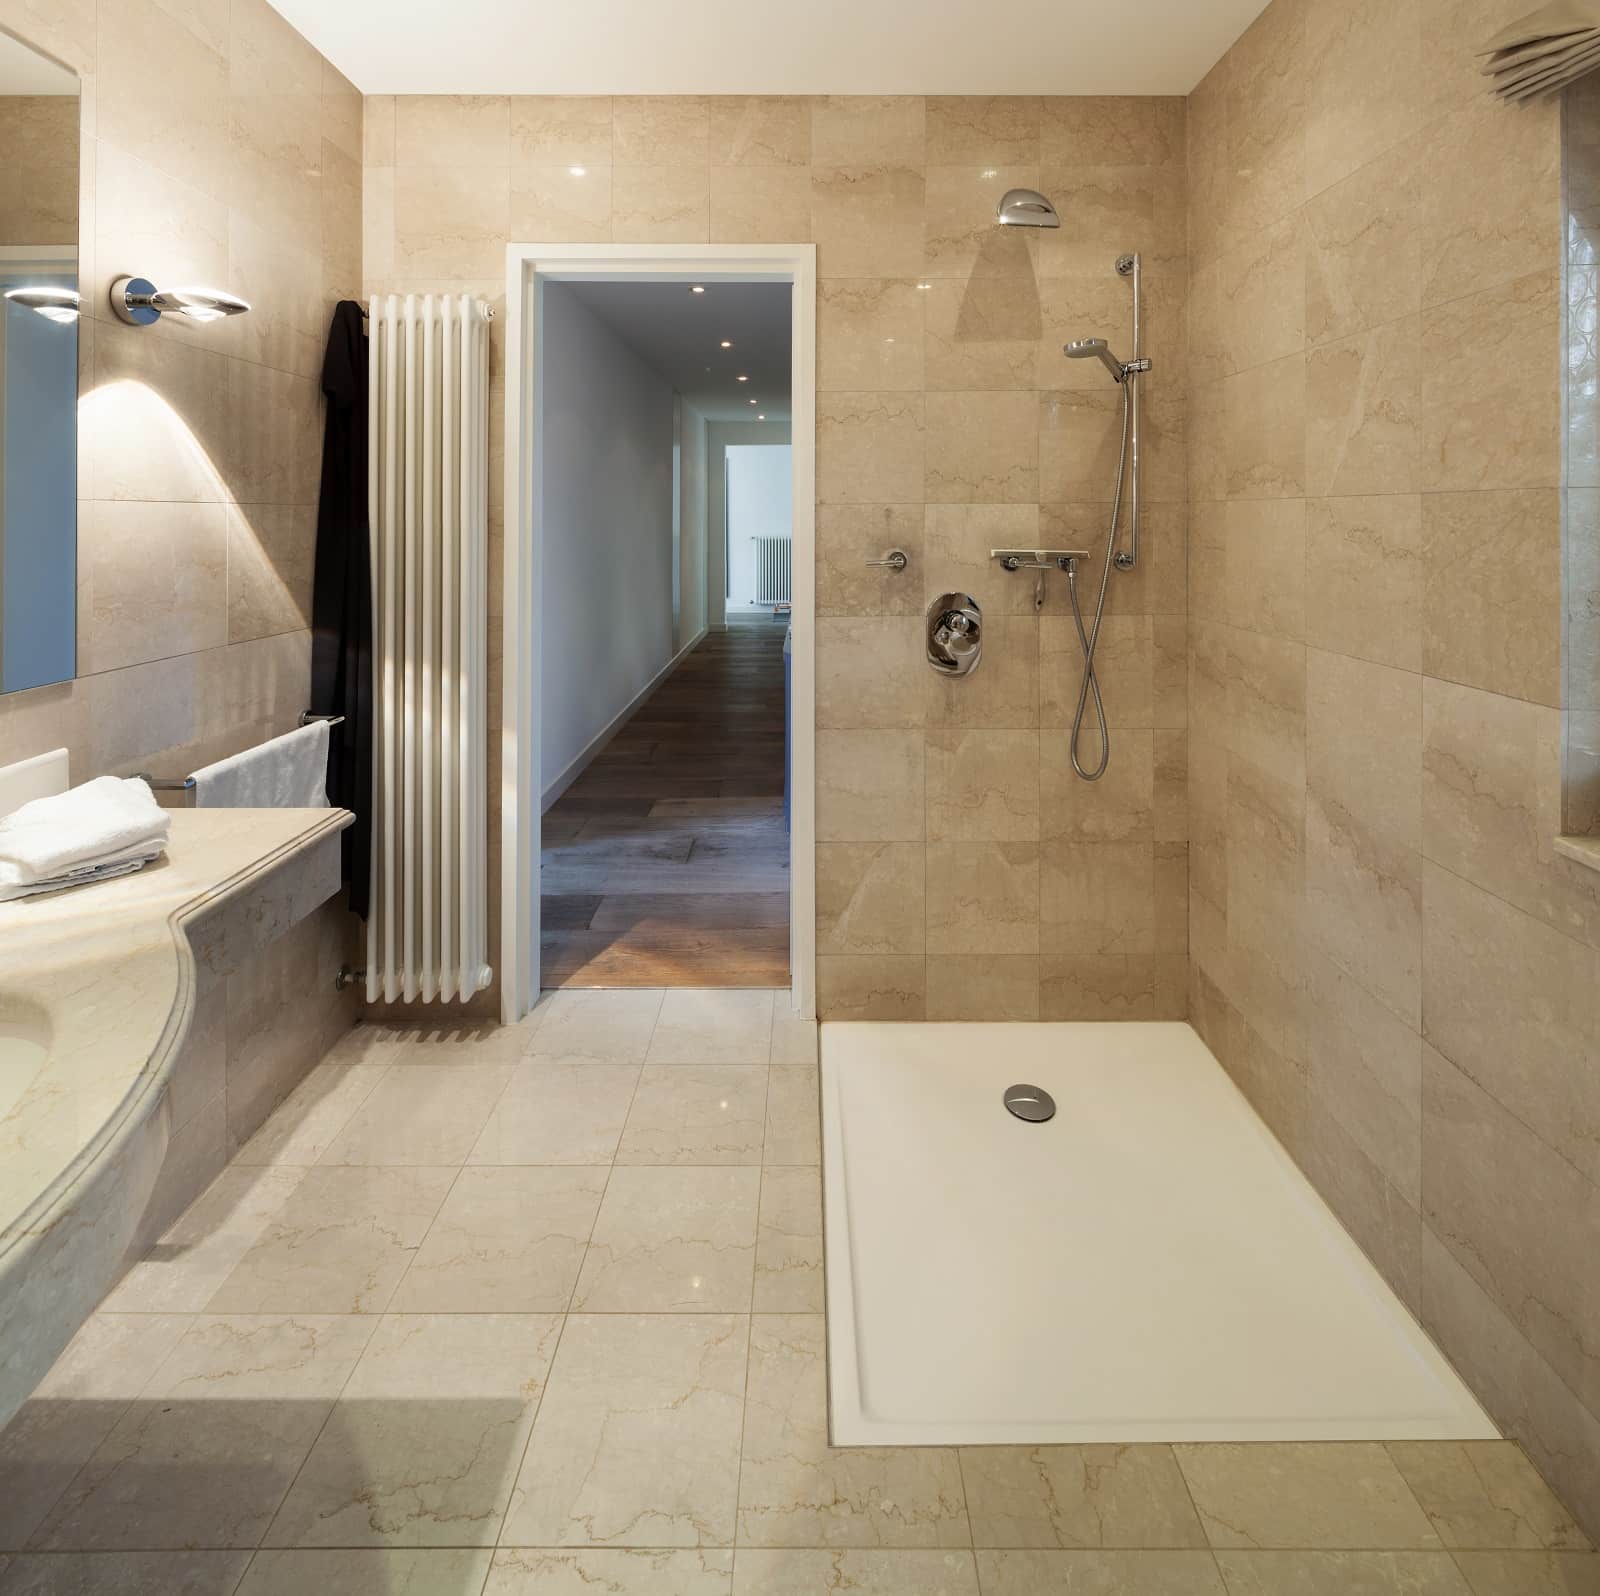 Monolithic bathroom design with sandy colored ceramic tile and white tray at the shower zone